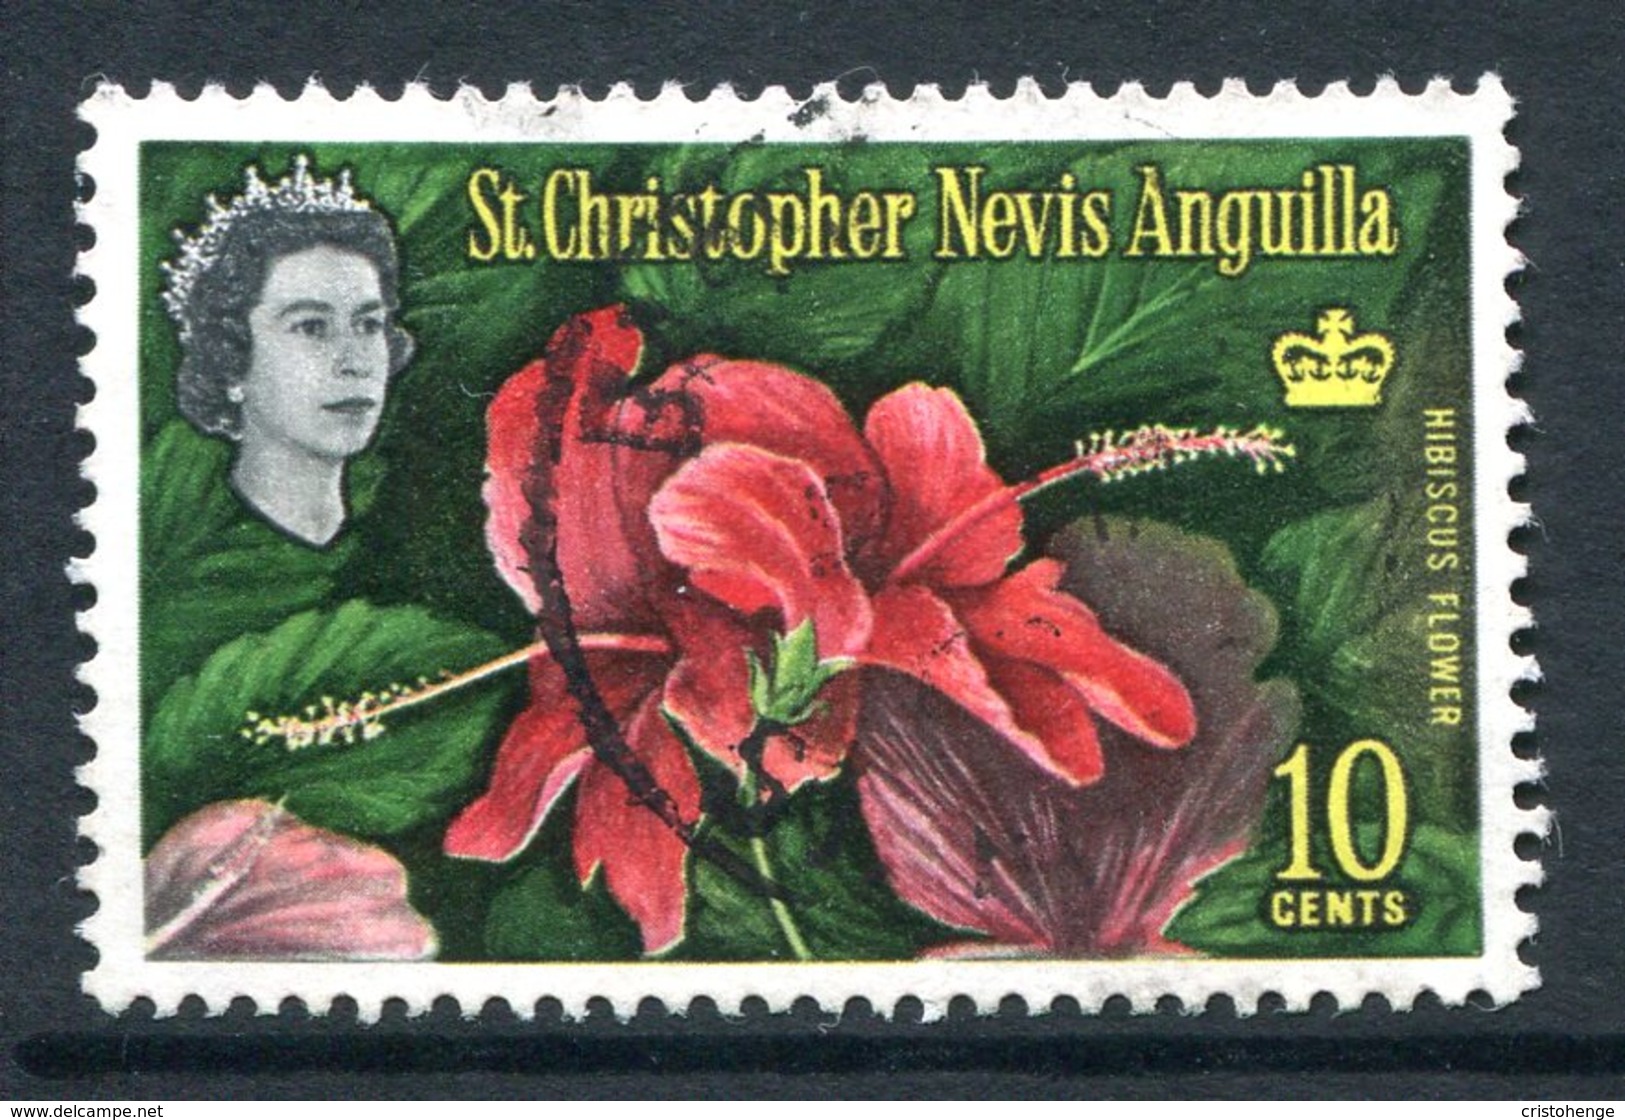 St Kitts, Nevis & Anguilla 1963-69 QEII Pictorials - 10c Hibiscus Used (SG 136) - St.Christopher-Nevis-Anguilla (...-1980)